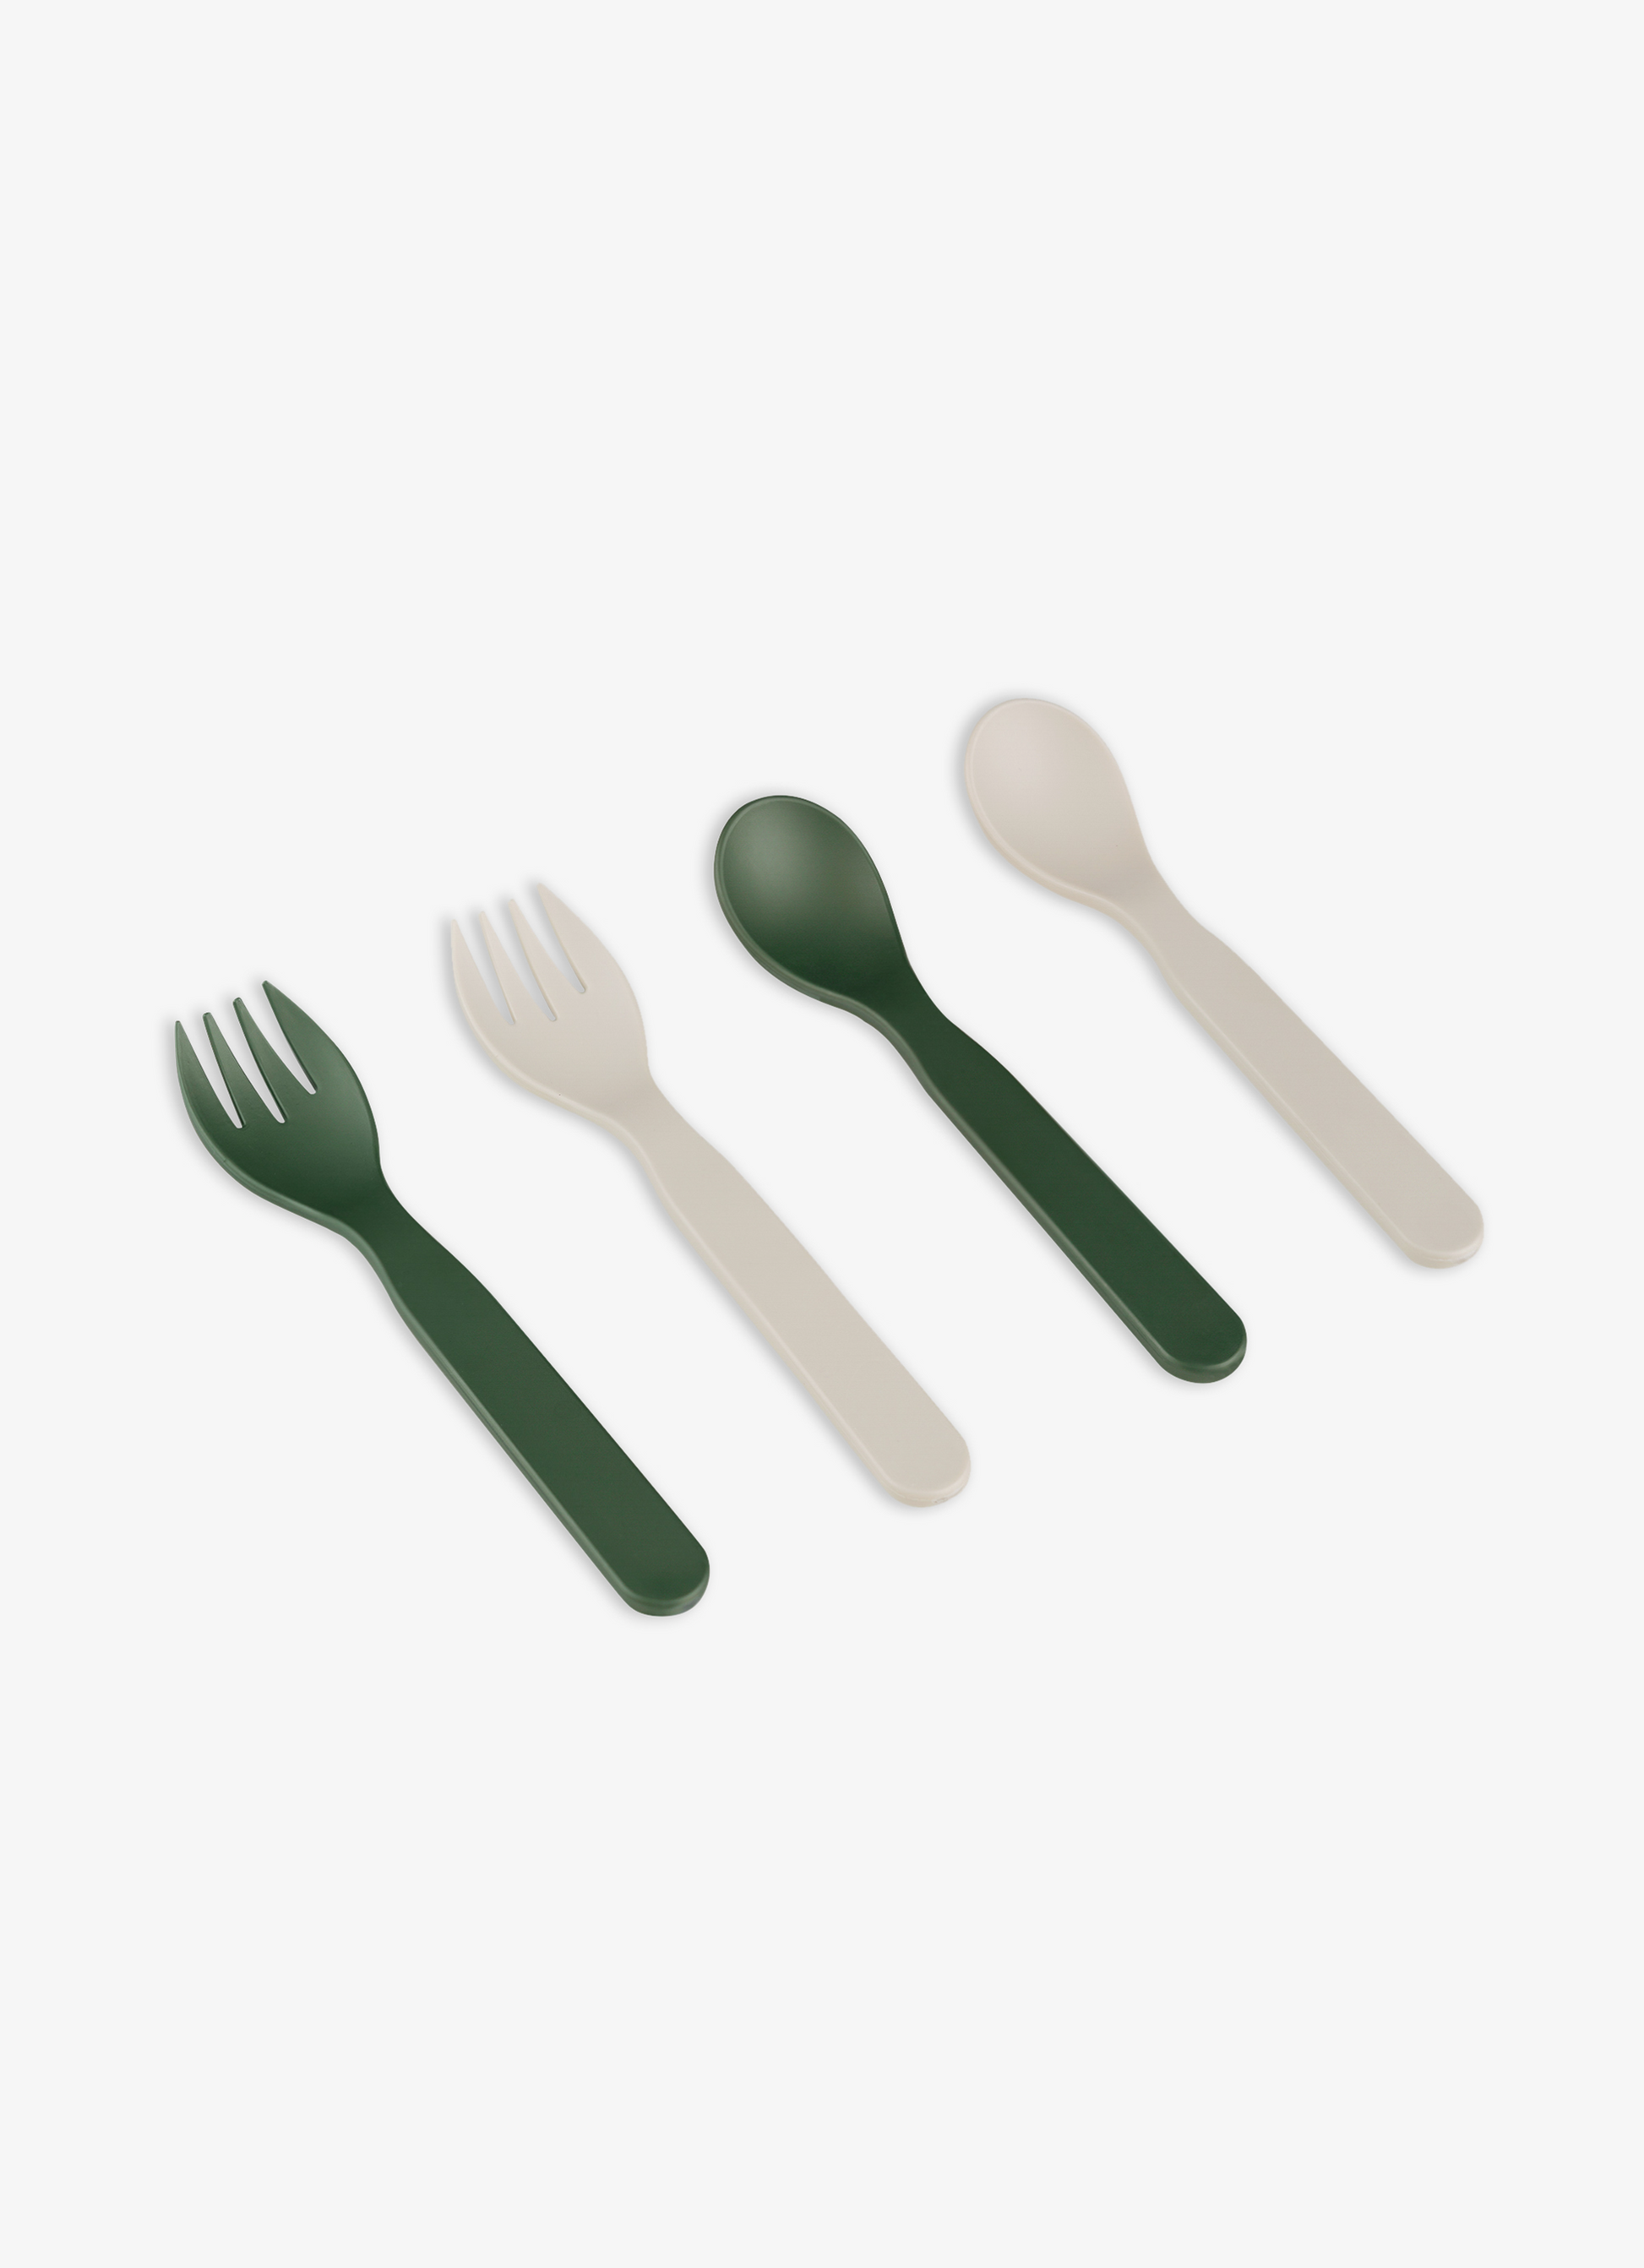 Citron PLA Cutlery Set of 2 and Case - Green/Cream - Laadlee